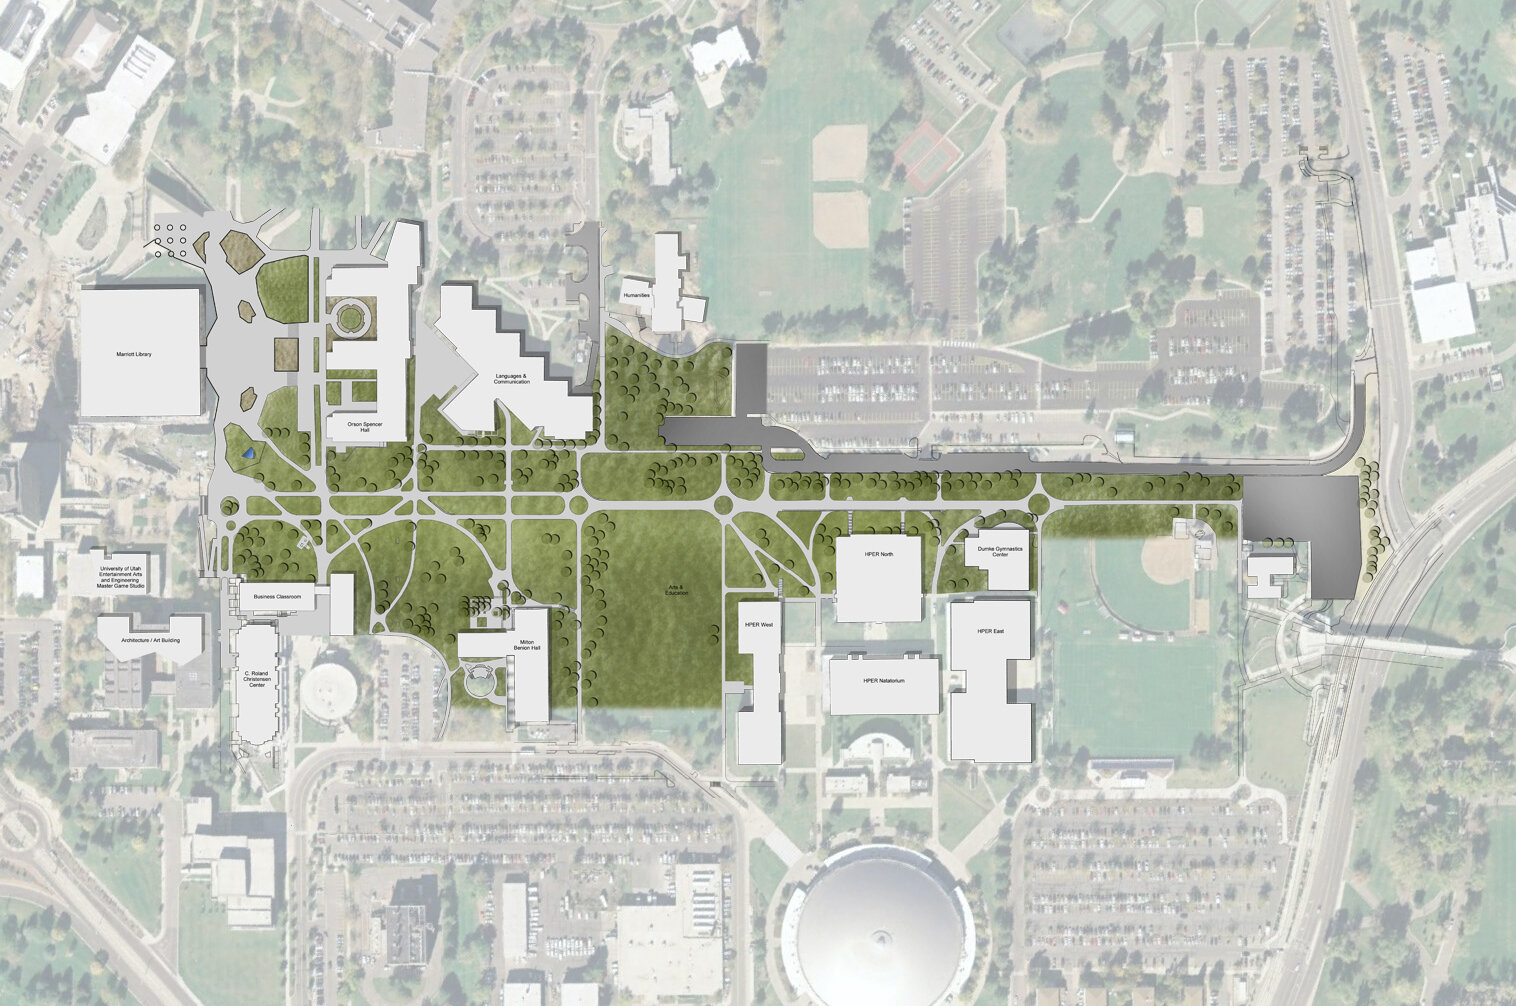  Graphic description of the pre-HPER Mall Master Plan and improvements. The circulation patterns do not consider existing steep grades, ADA access, or pedestrian desire routes. Storm water mitigation is directly connected to existing Salt Lake City d